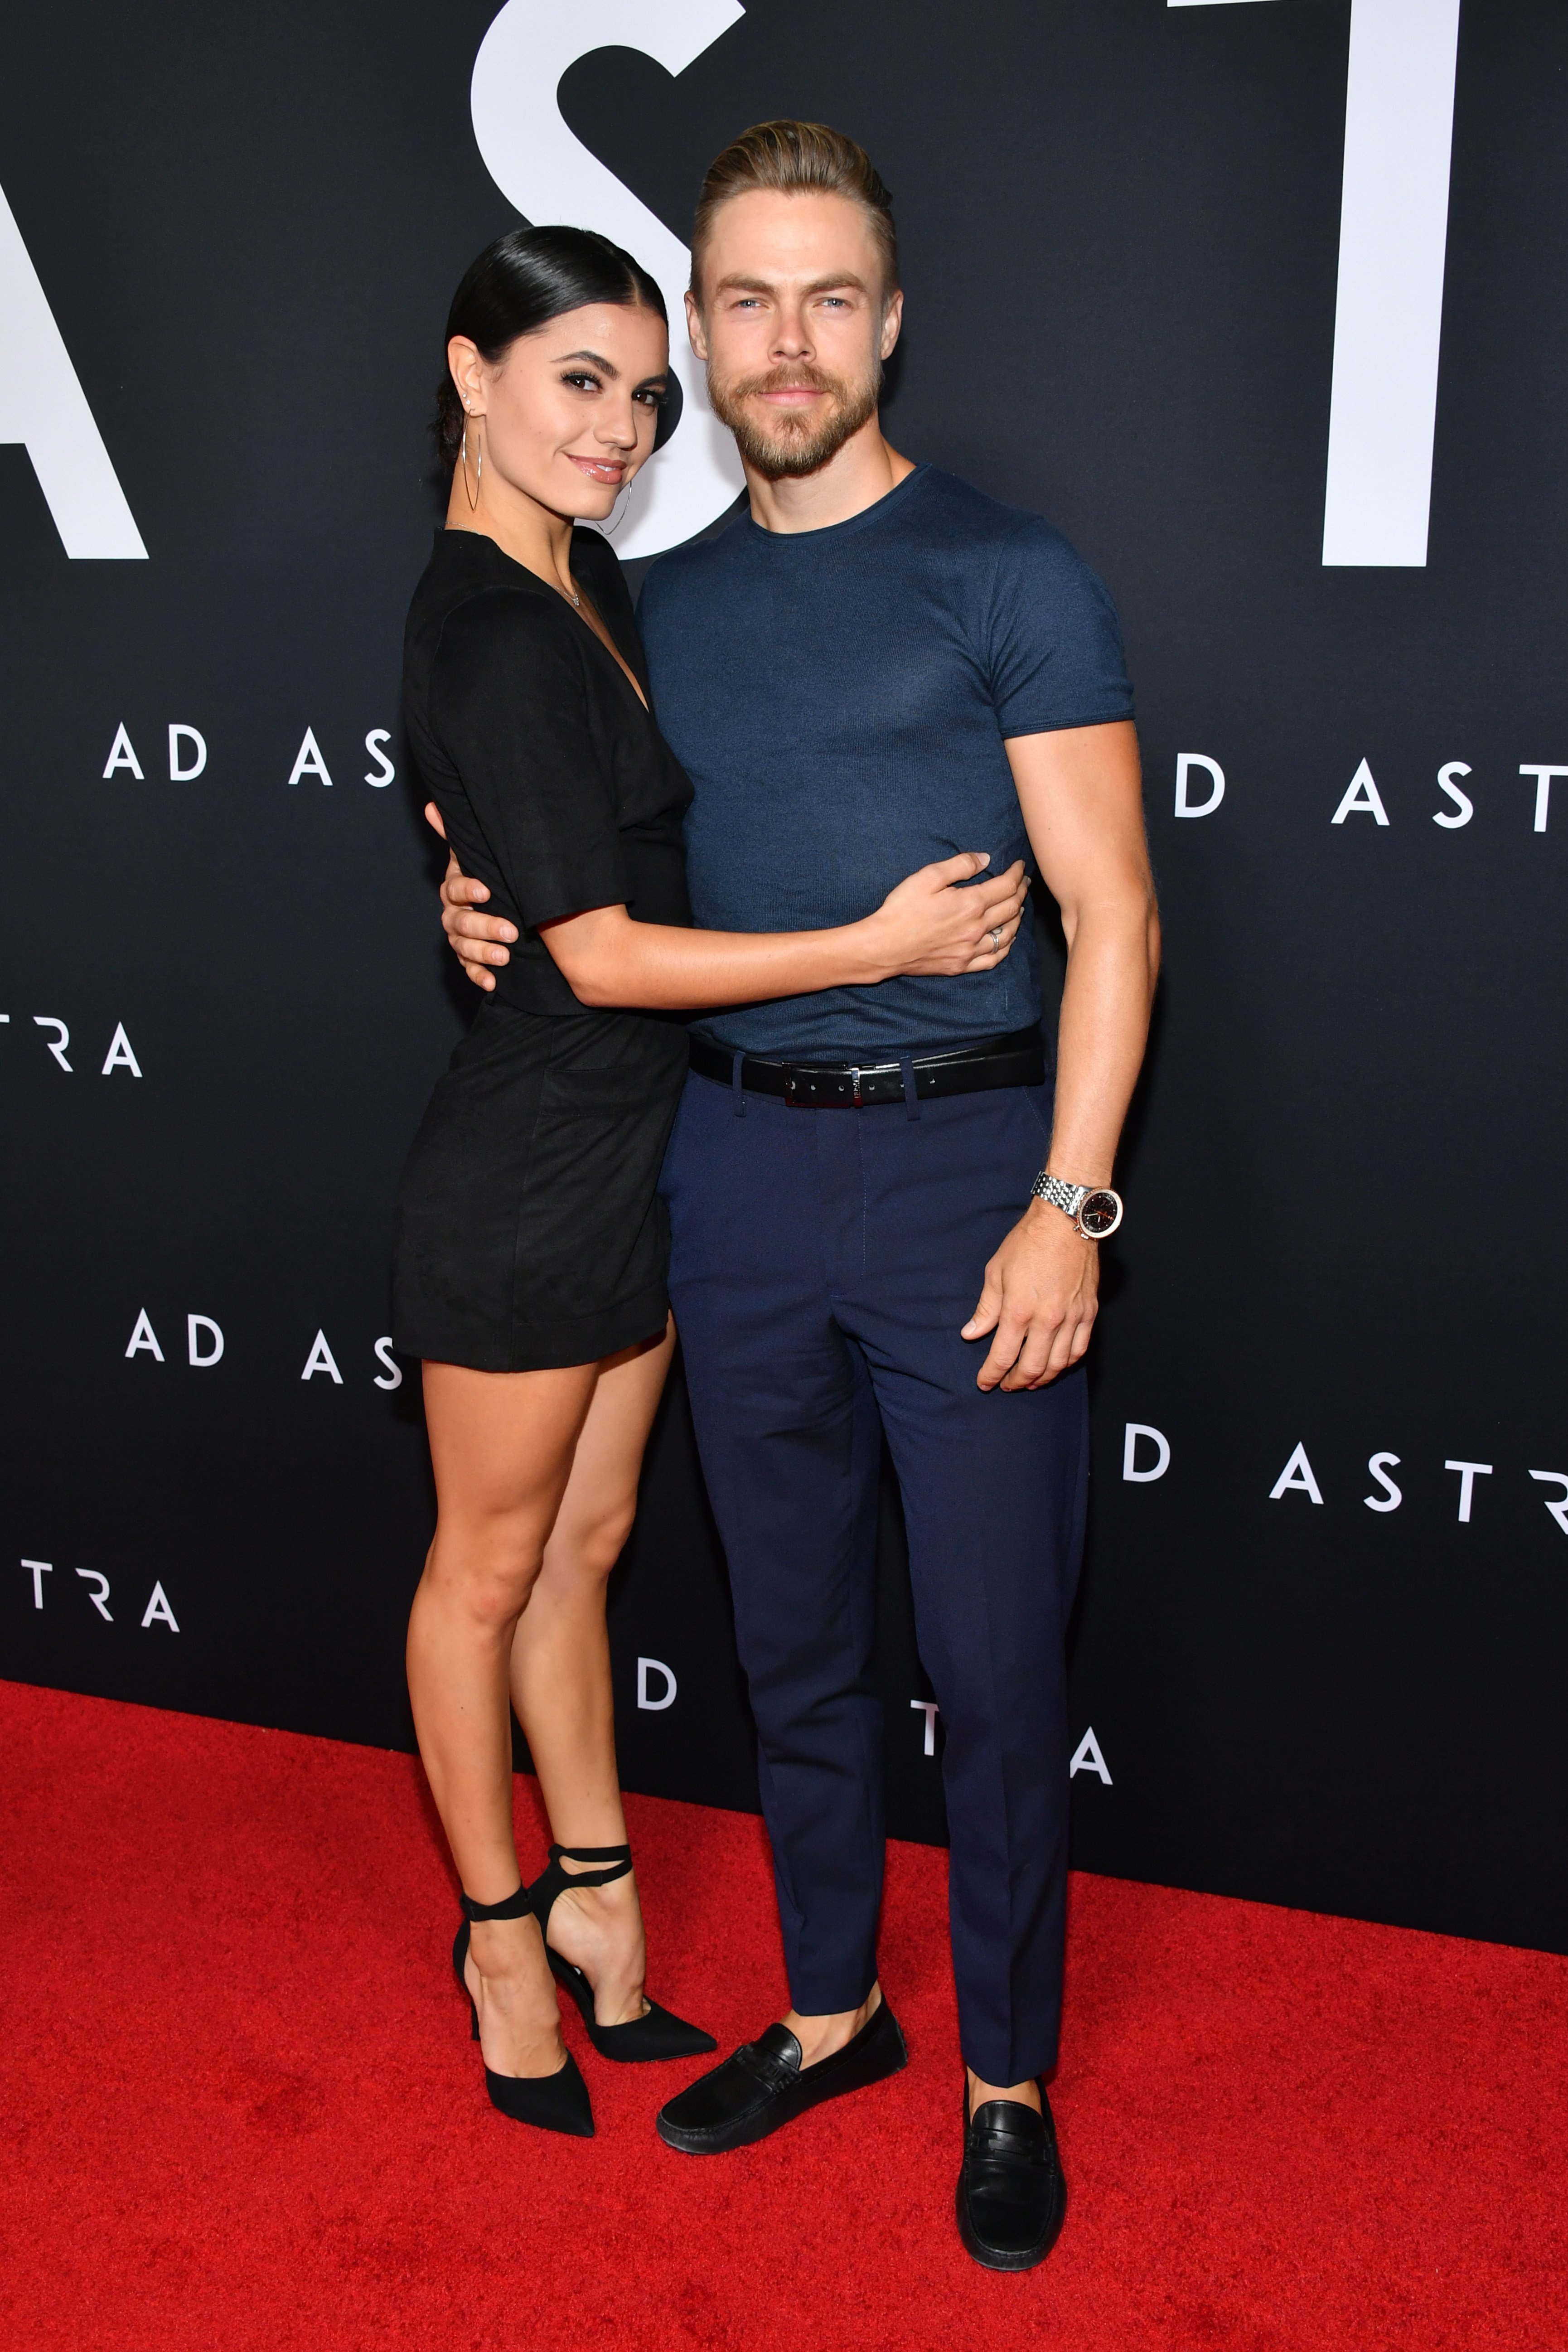 Hayley Erbert and Derek Hough attend the premiere of "Ad Astra" in Los Angeles, California on September 18, 2019 | Photo: Getty Images